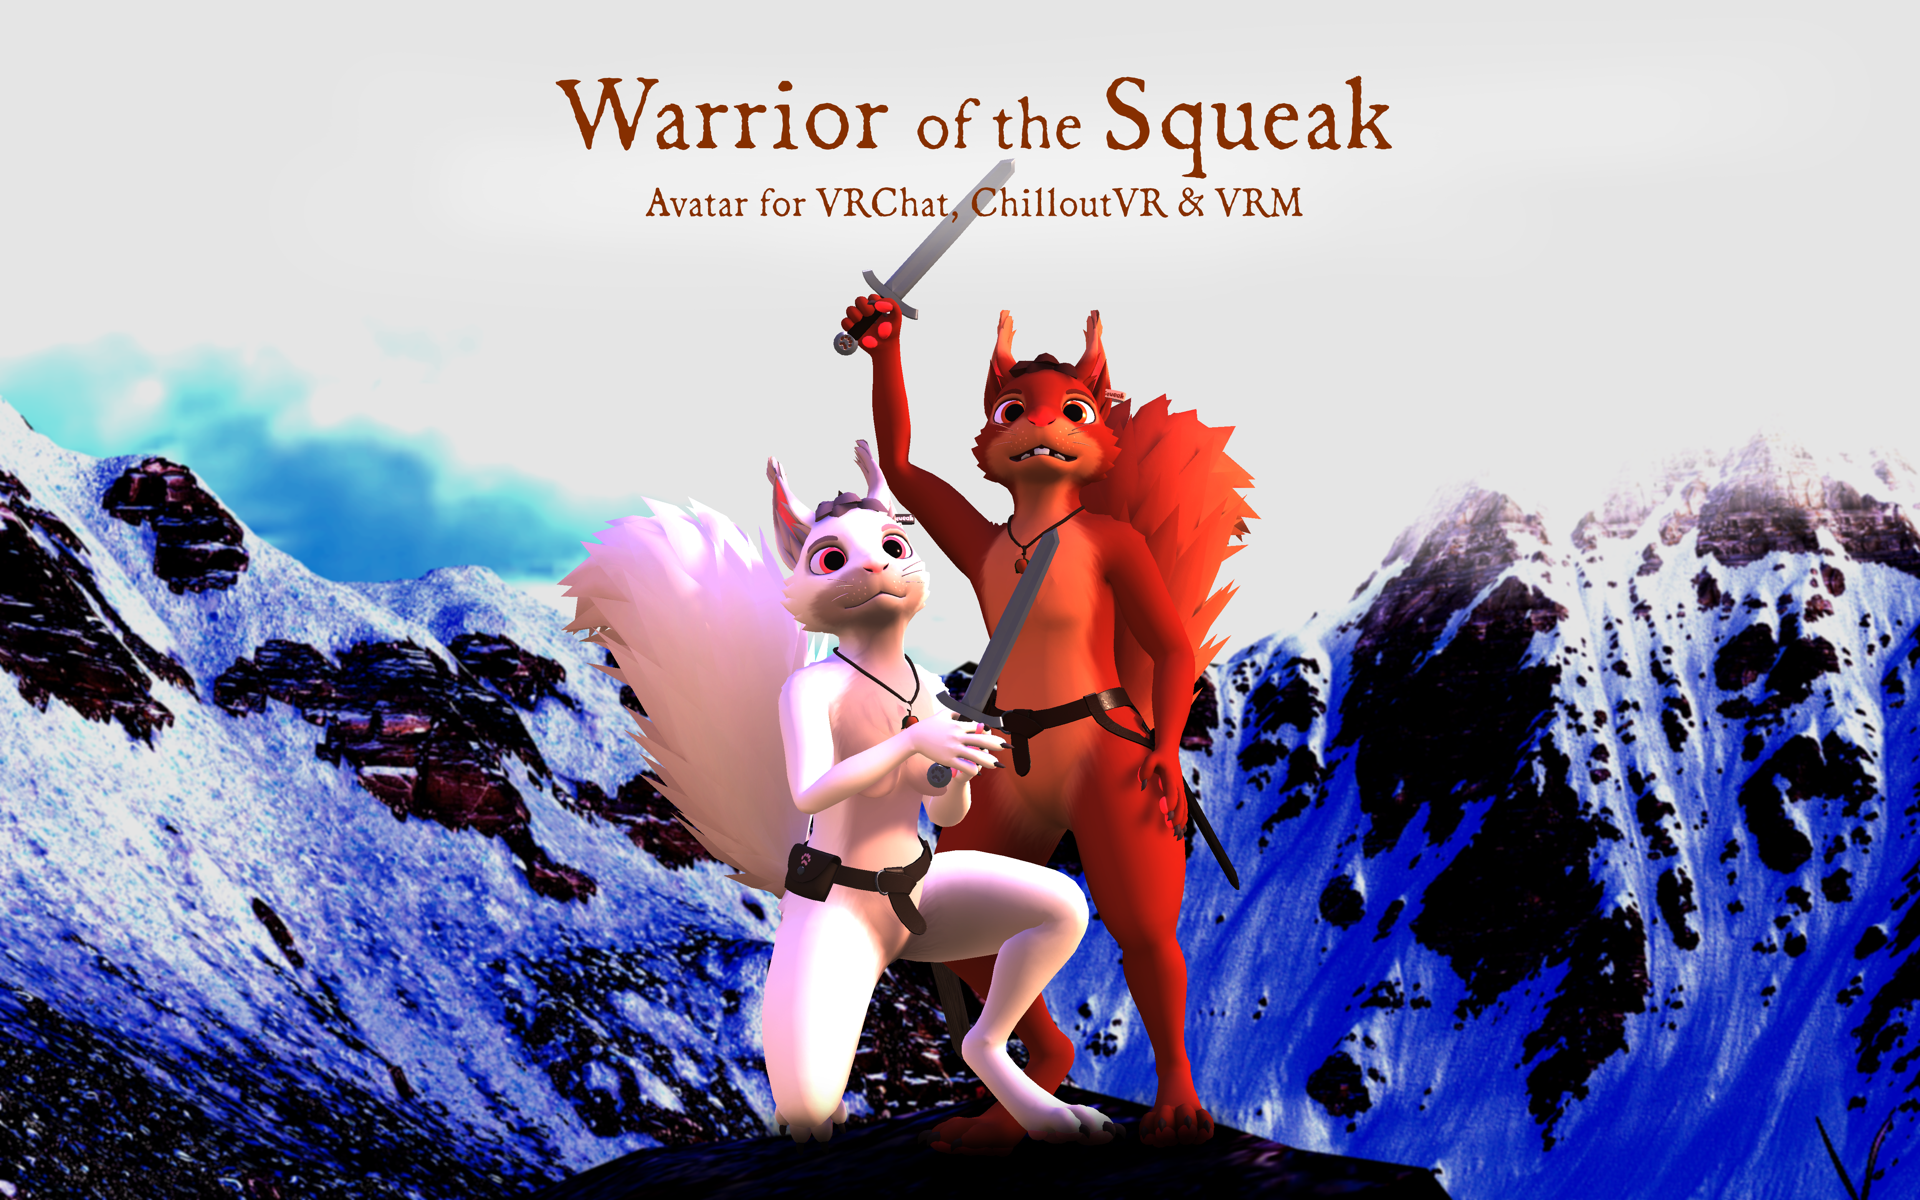 Warrior of the Squeak (Free Squirrel Avatar for VRChat, ChilloutVR, VRM)